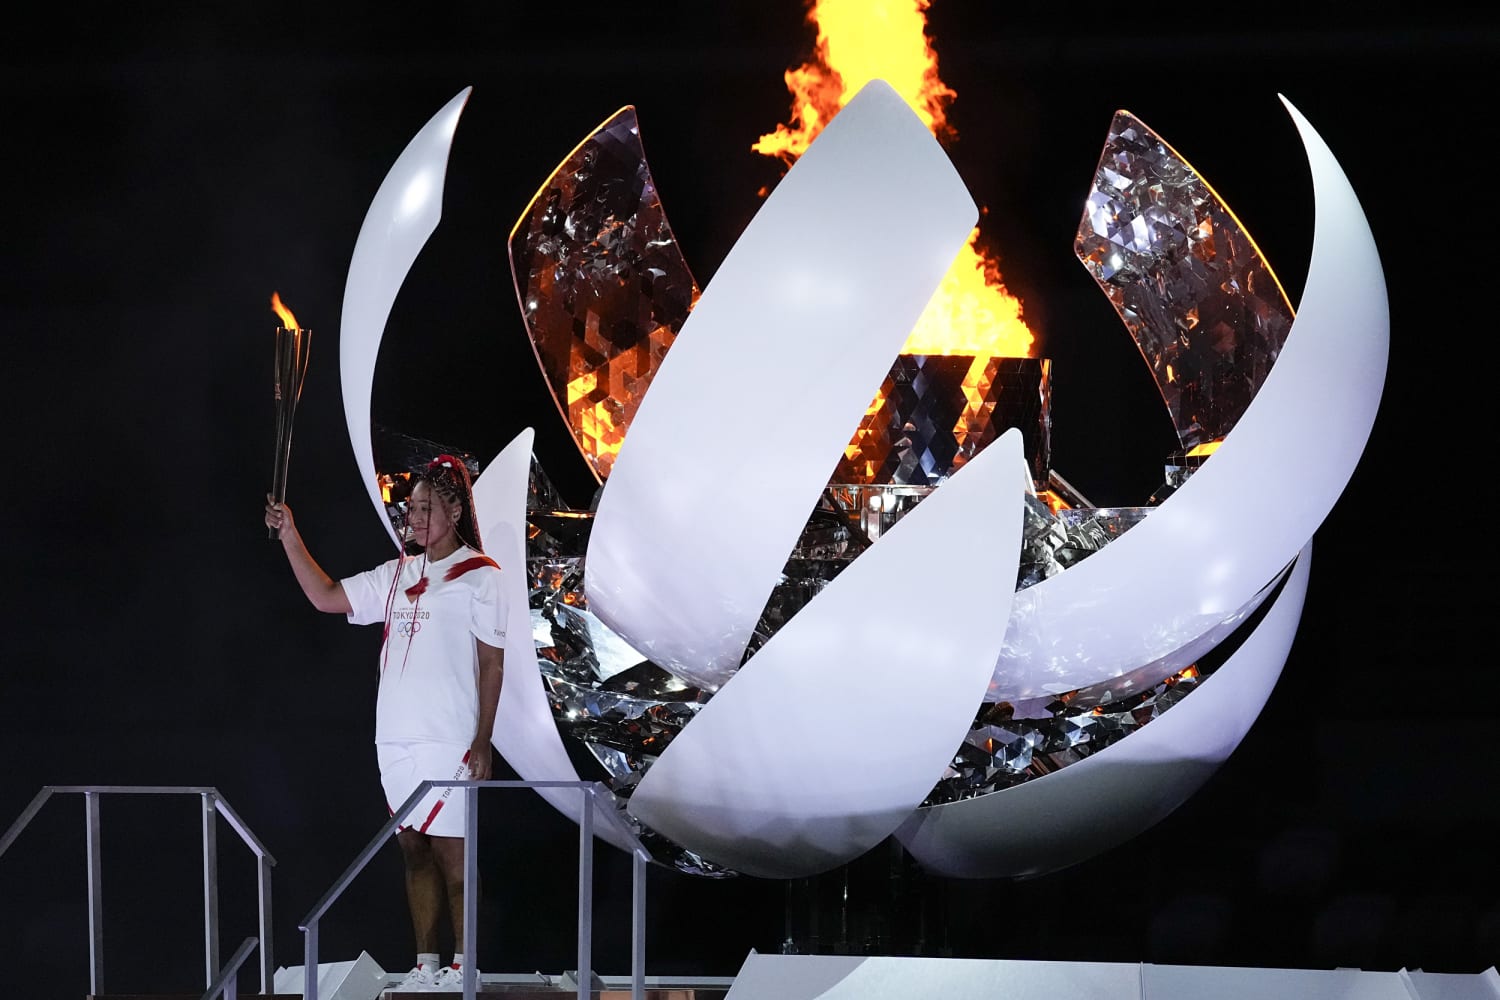 Tokyo Olympics opening ceremony clings to traditions - Los Angeles